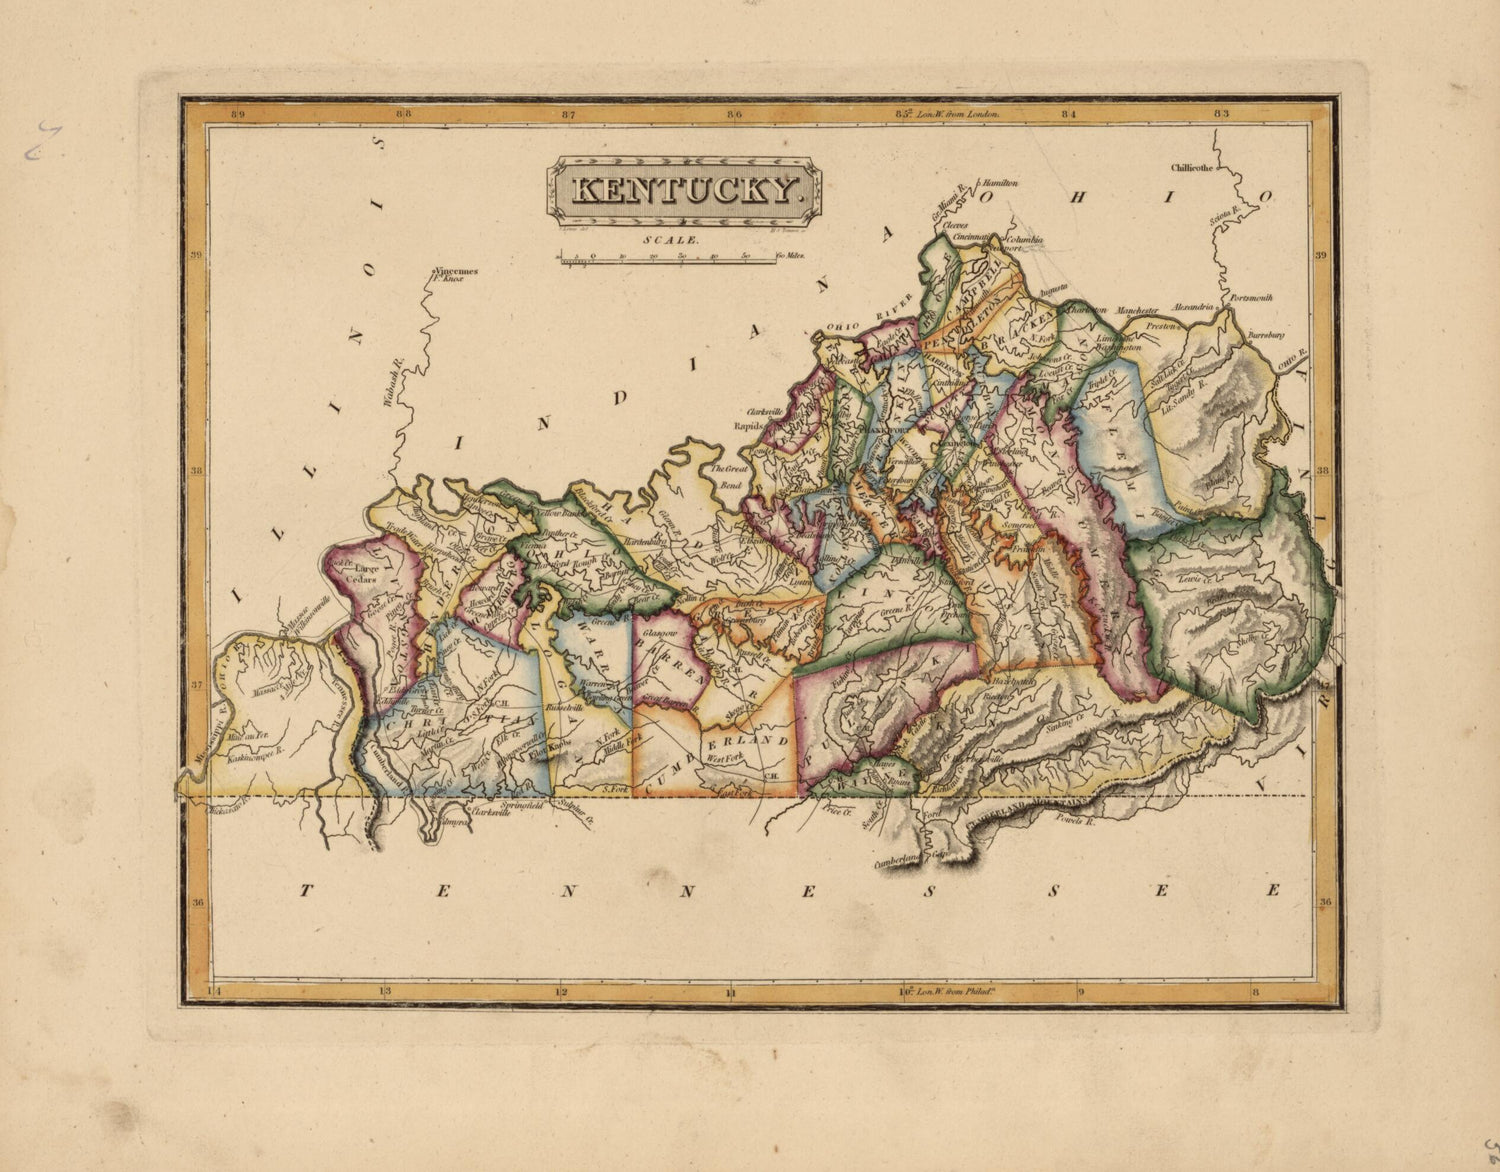 This old map of Kentucky from a New and Elegant General Atlas, Containing Maps of Each of the United States  from 1817 was created by Henry Schenck Tanner in 1817